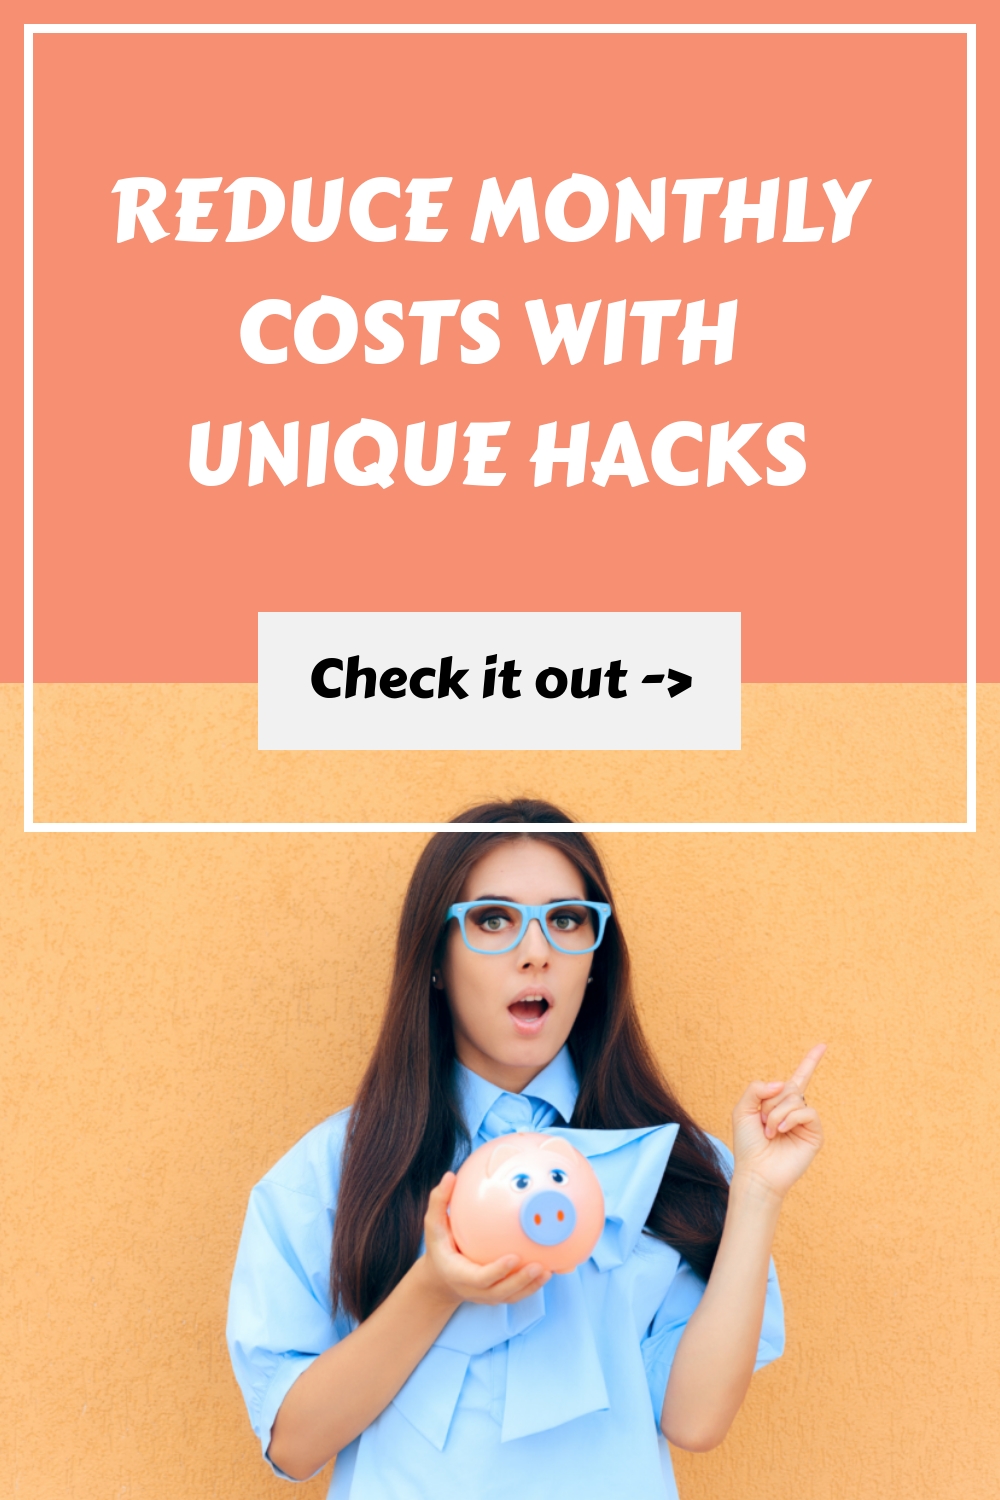 Reduce Monthly Costs with Unique Hacks